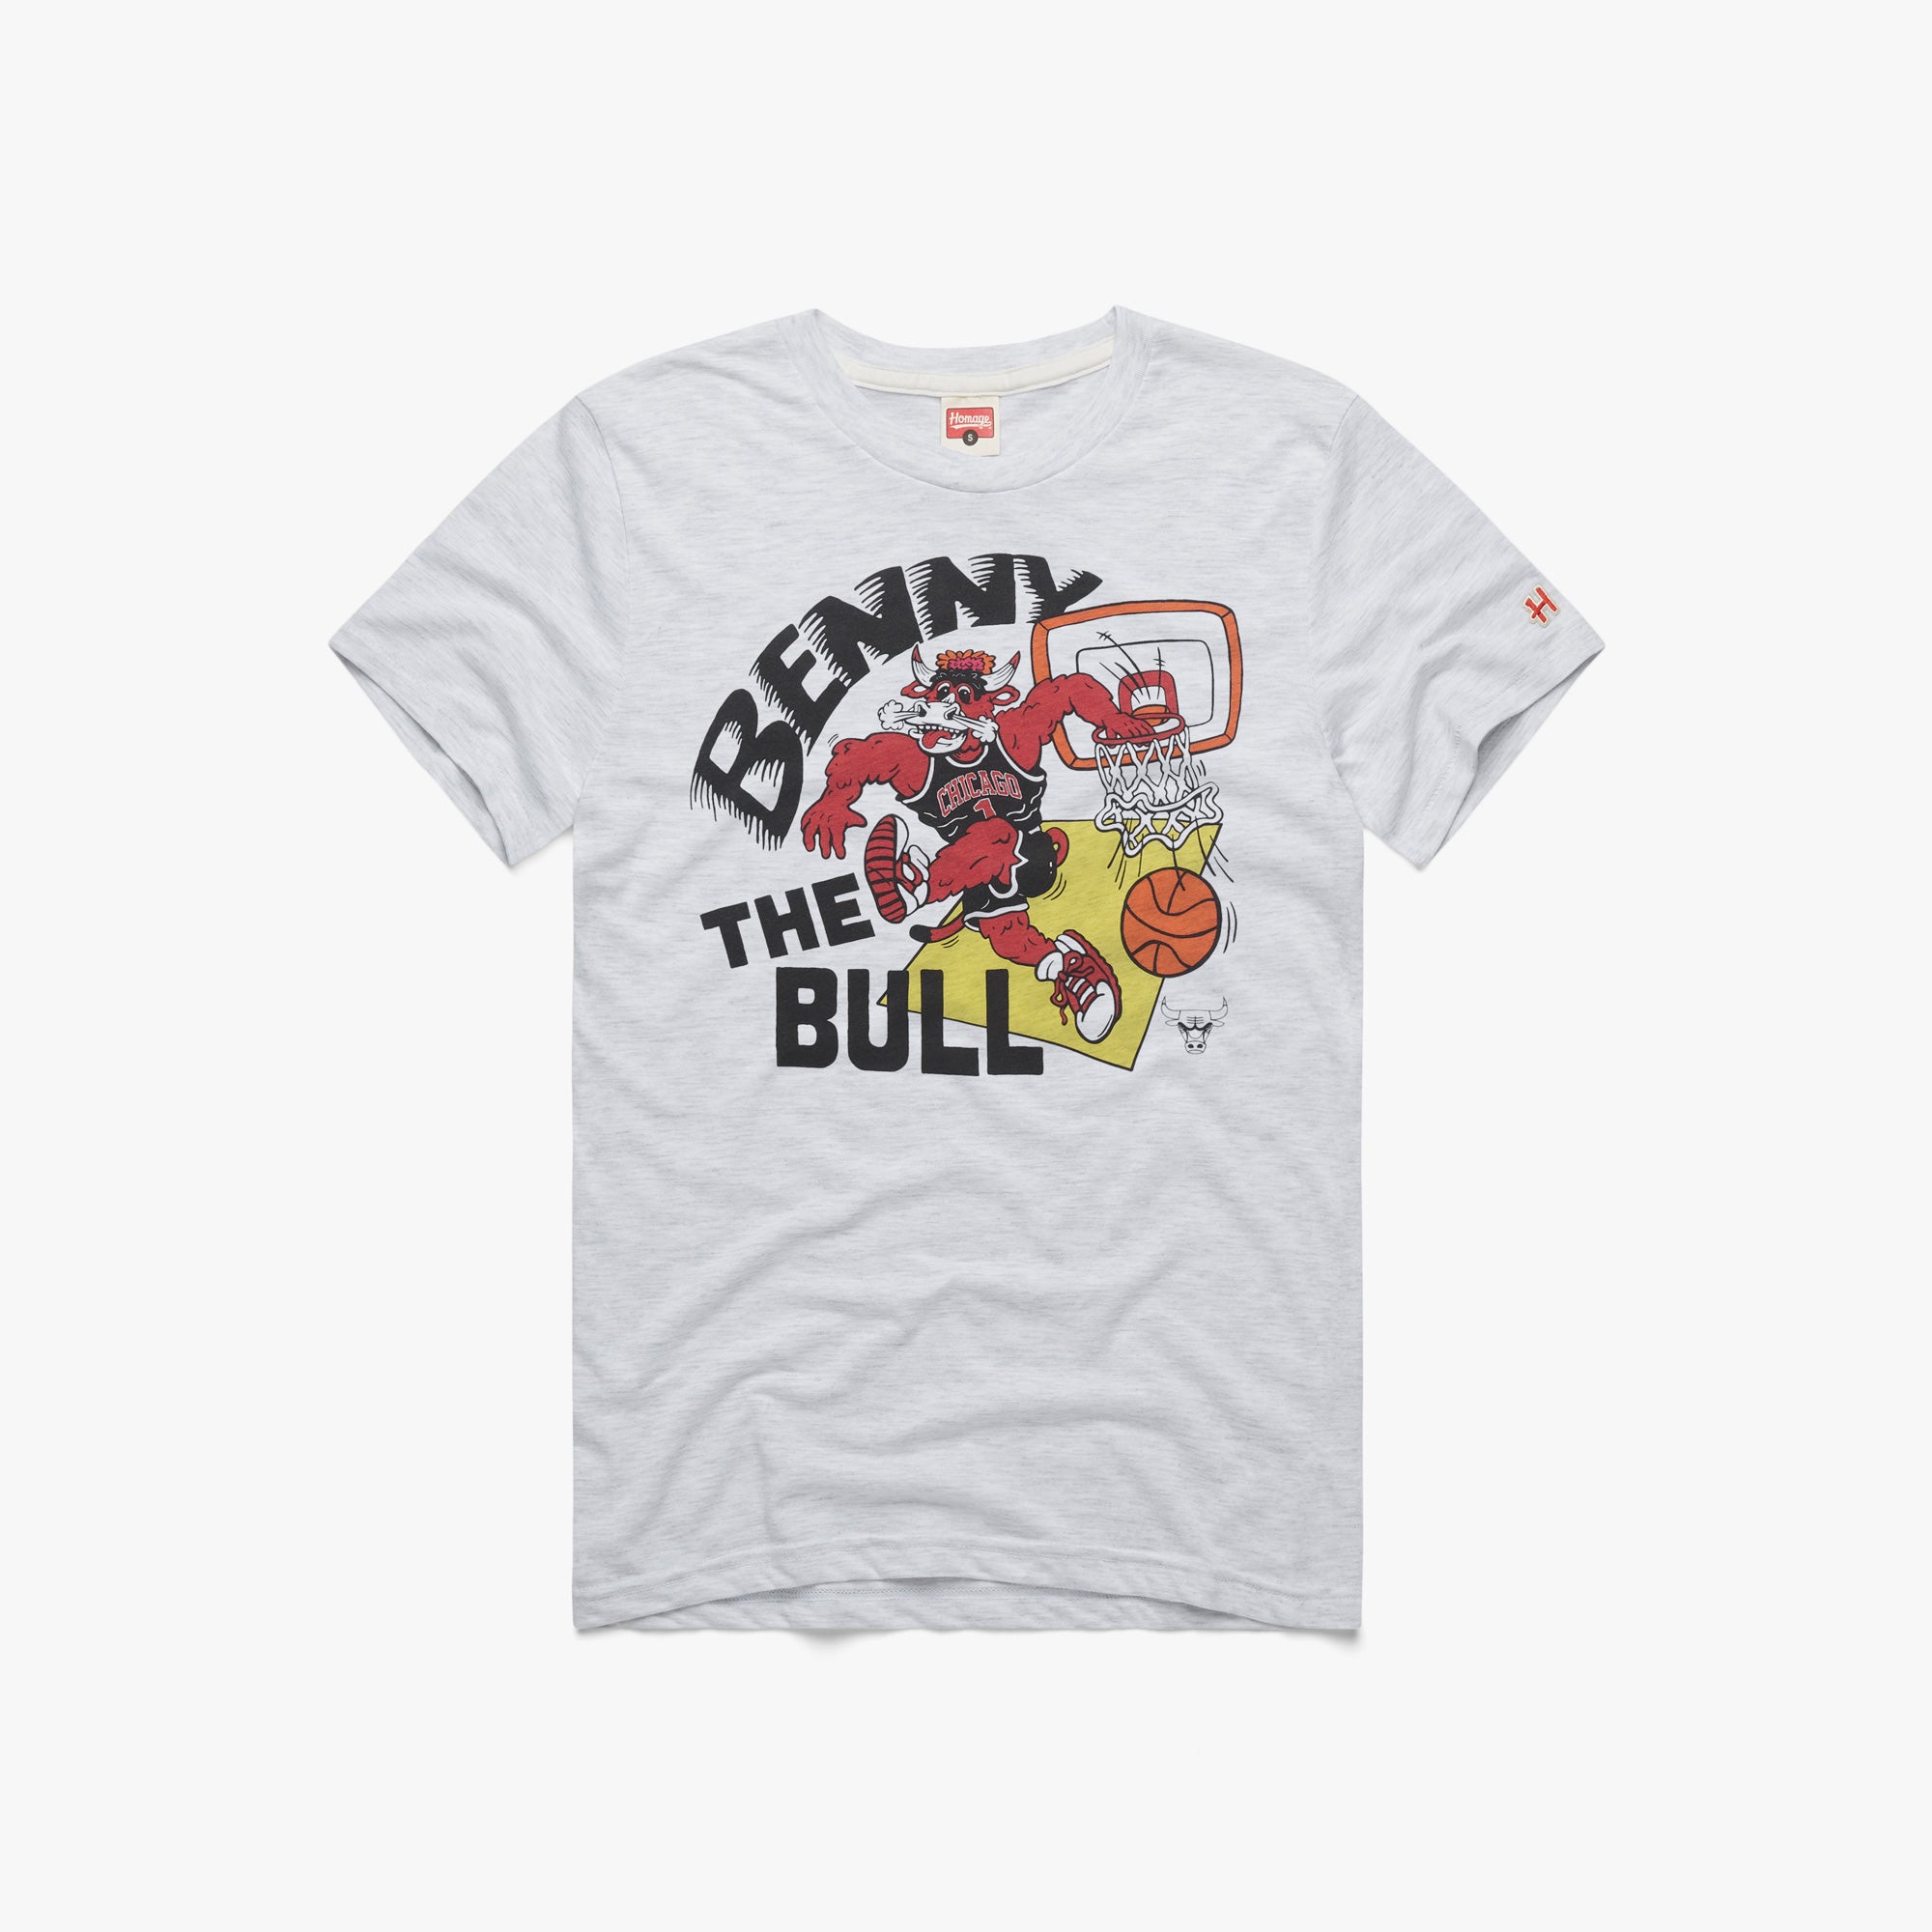 Chicago Bulls Logo T-Shirt from Homage. | Grey | Vintage Apparel from Homage.